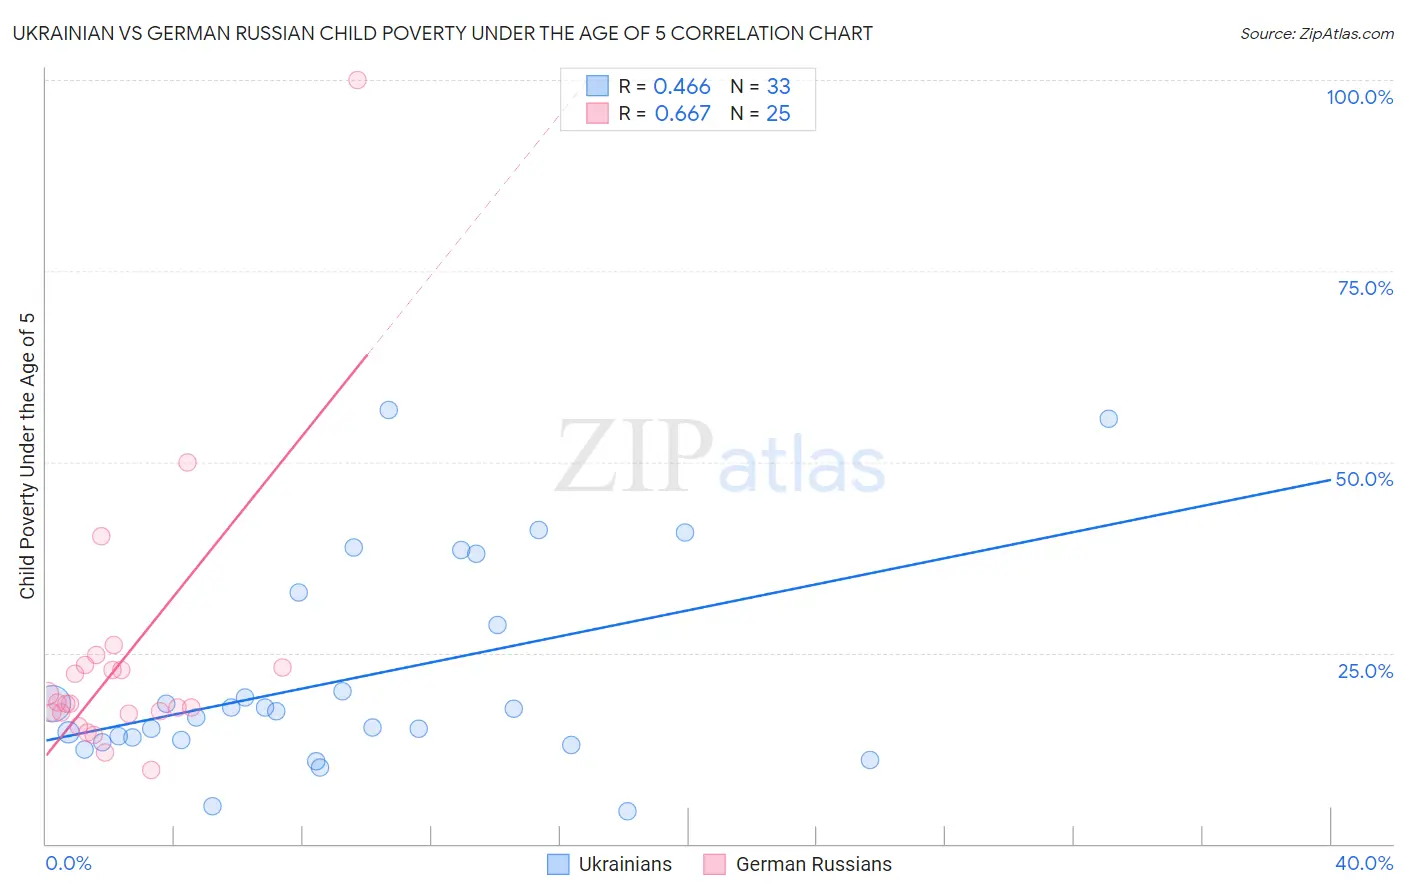 Ukrainian vs German Russian Child Poverty Under the Age of 5